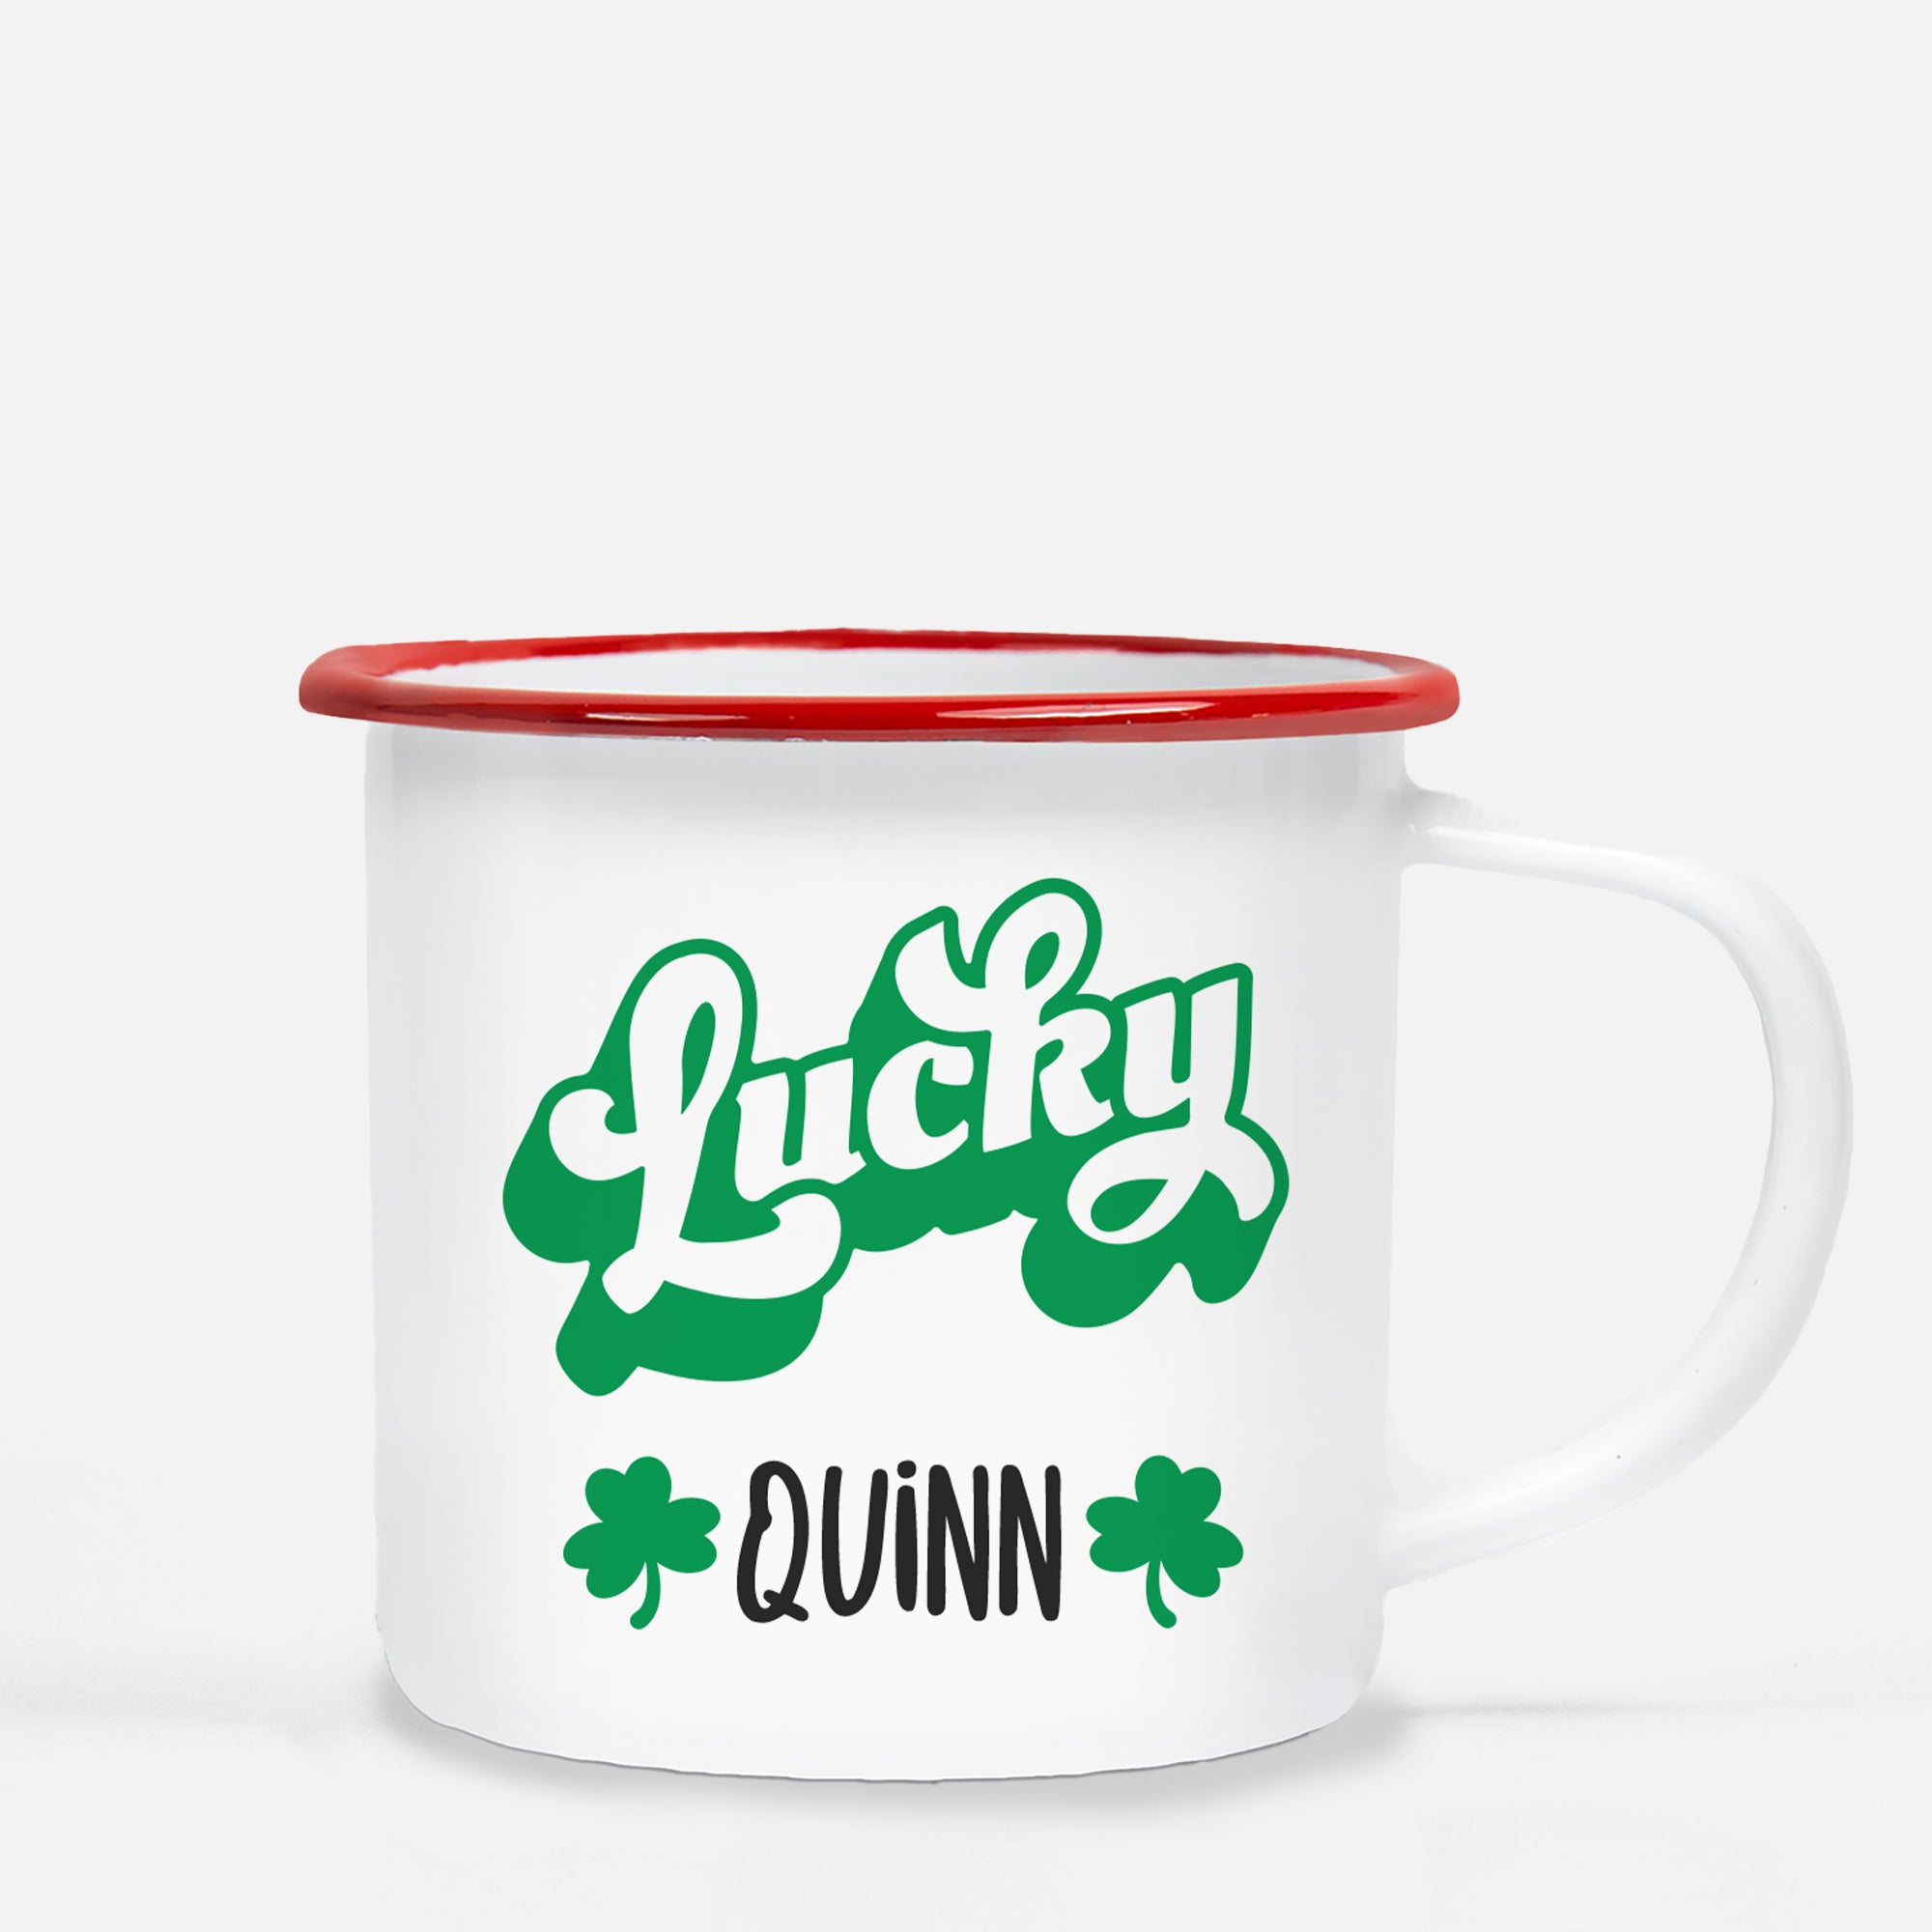 Lucky! Personalized Happy St. Patrick's Day12 oz metal camp mug.  red lip, white enamel, dishwasher safe, design printed on both sides.  unbreakable Pipsy.com